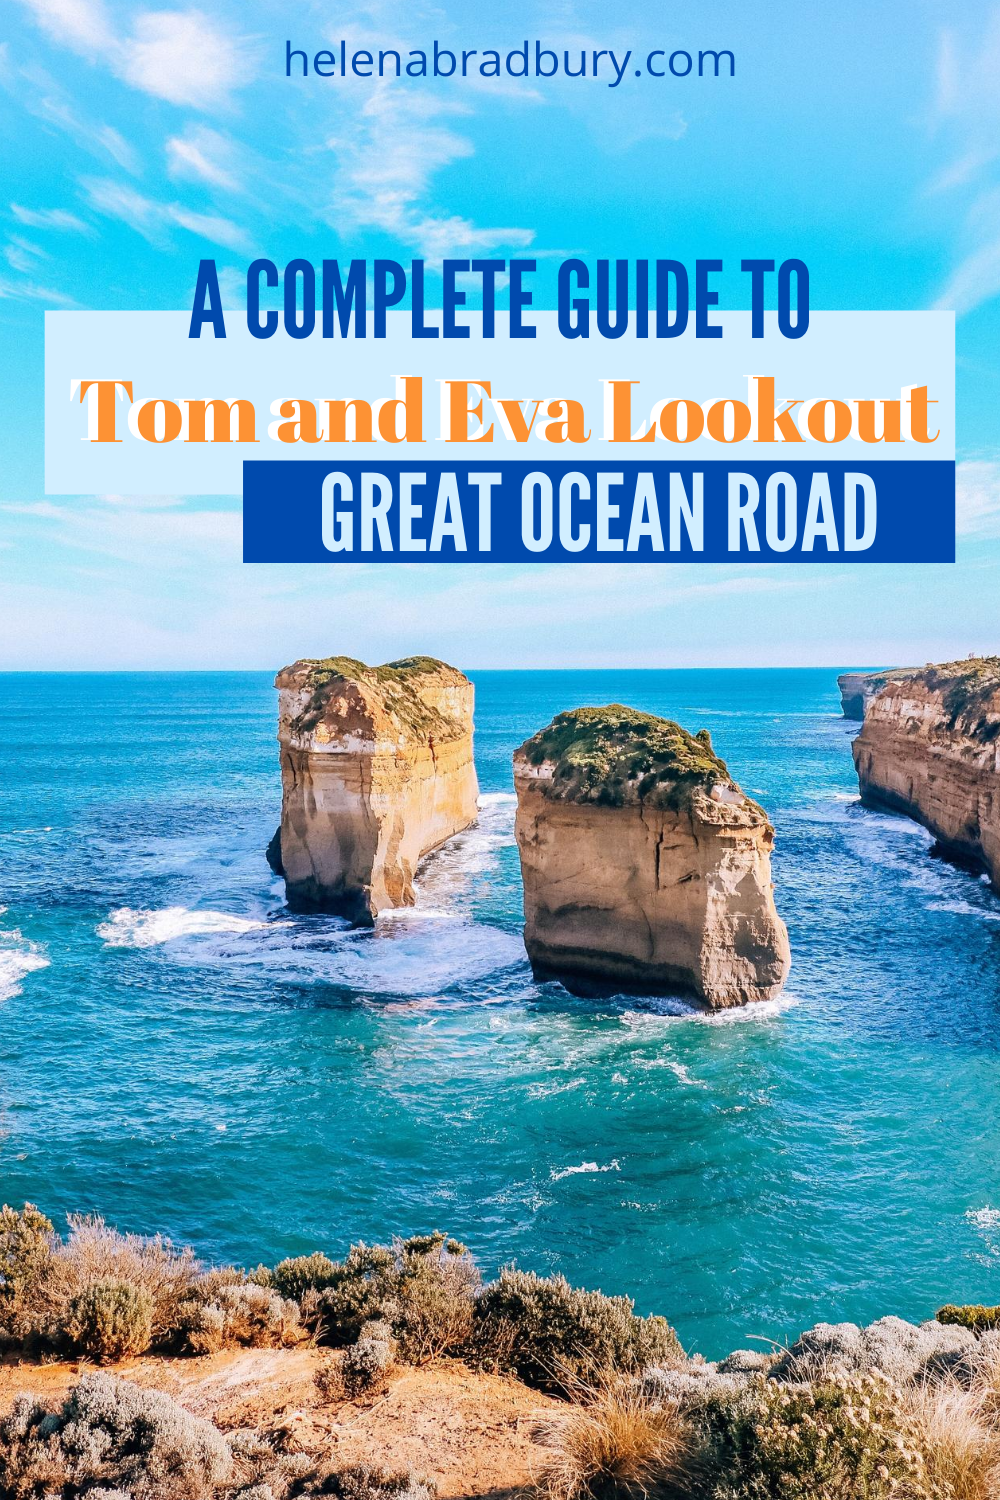 Most people know the famous Great Ocean Road and the 12 Apostles, but there are many other lesser known stops along the Great Ocean Road which are worth visiting. Tom and Eva Lookout is one of these underrated stops on the Great Ocean Road and this …